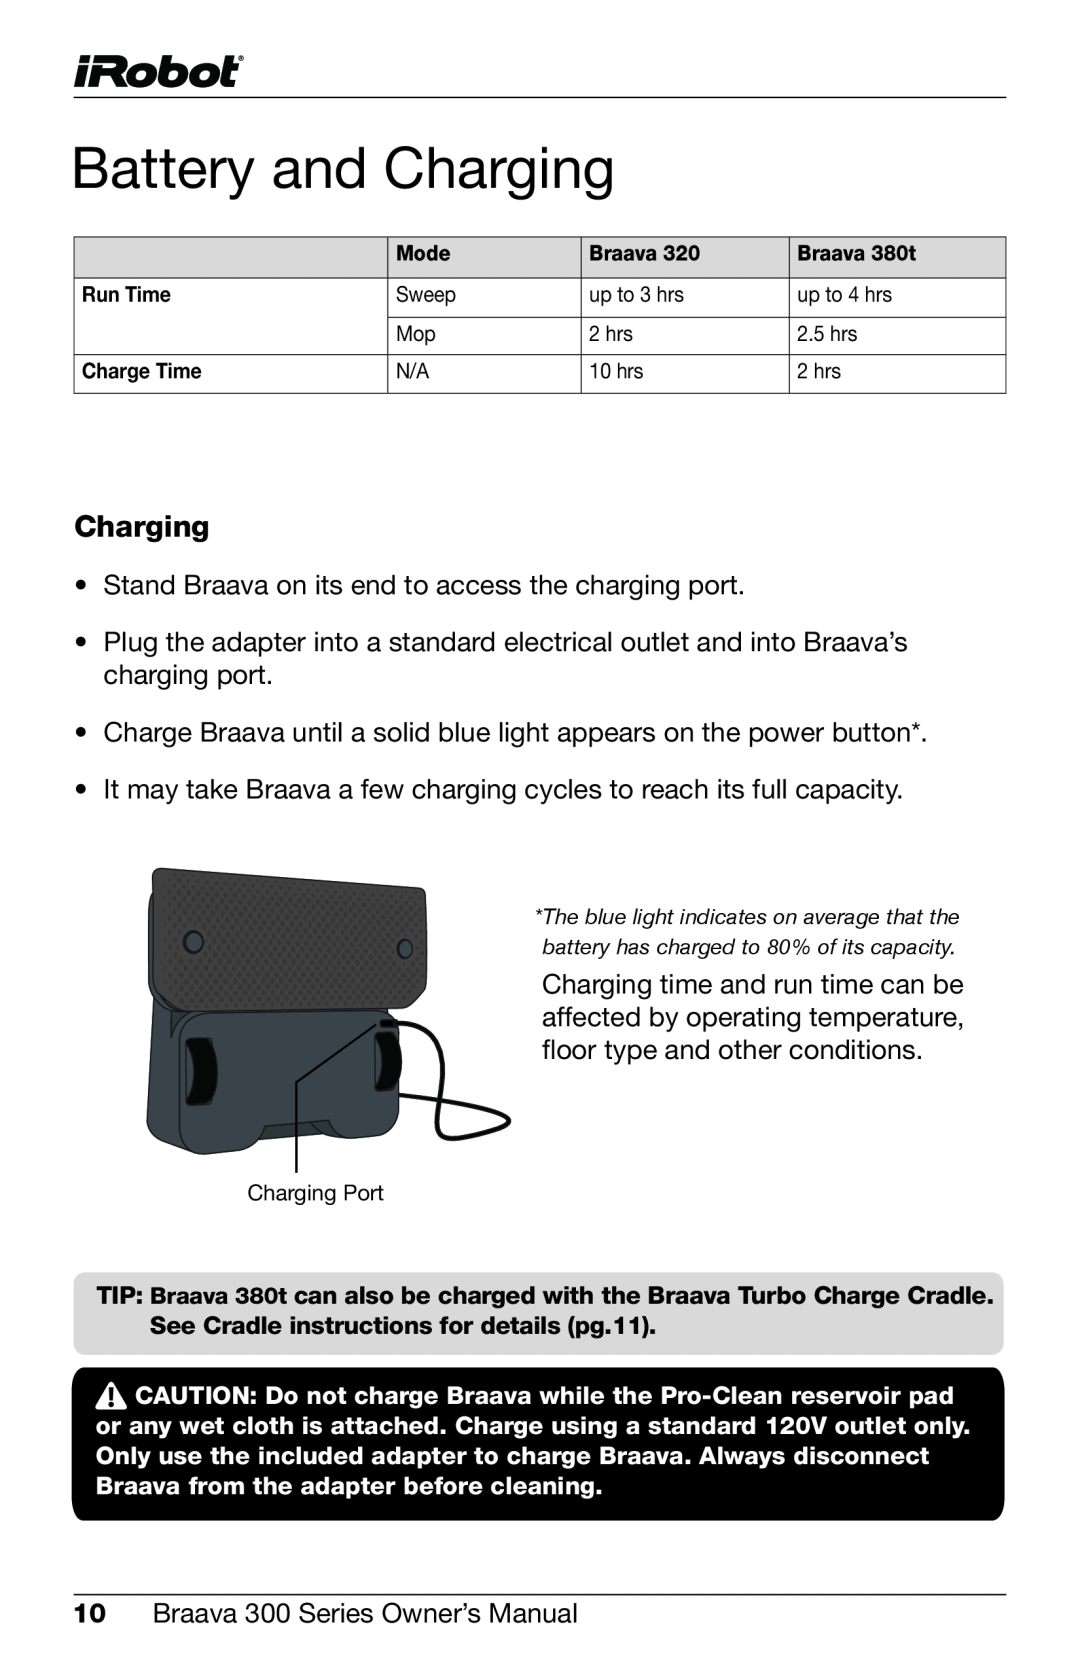 iRobot 320, 380t owner manual Battery and Charging 